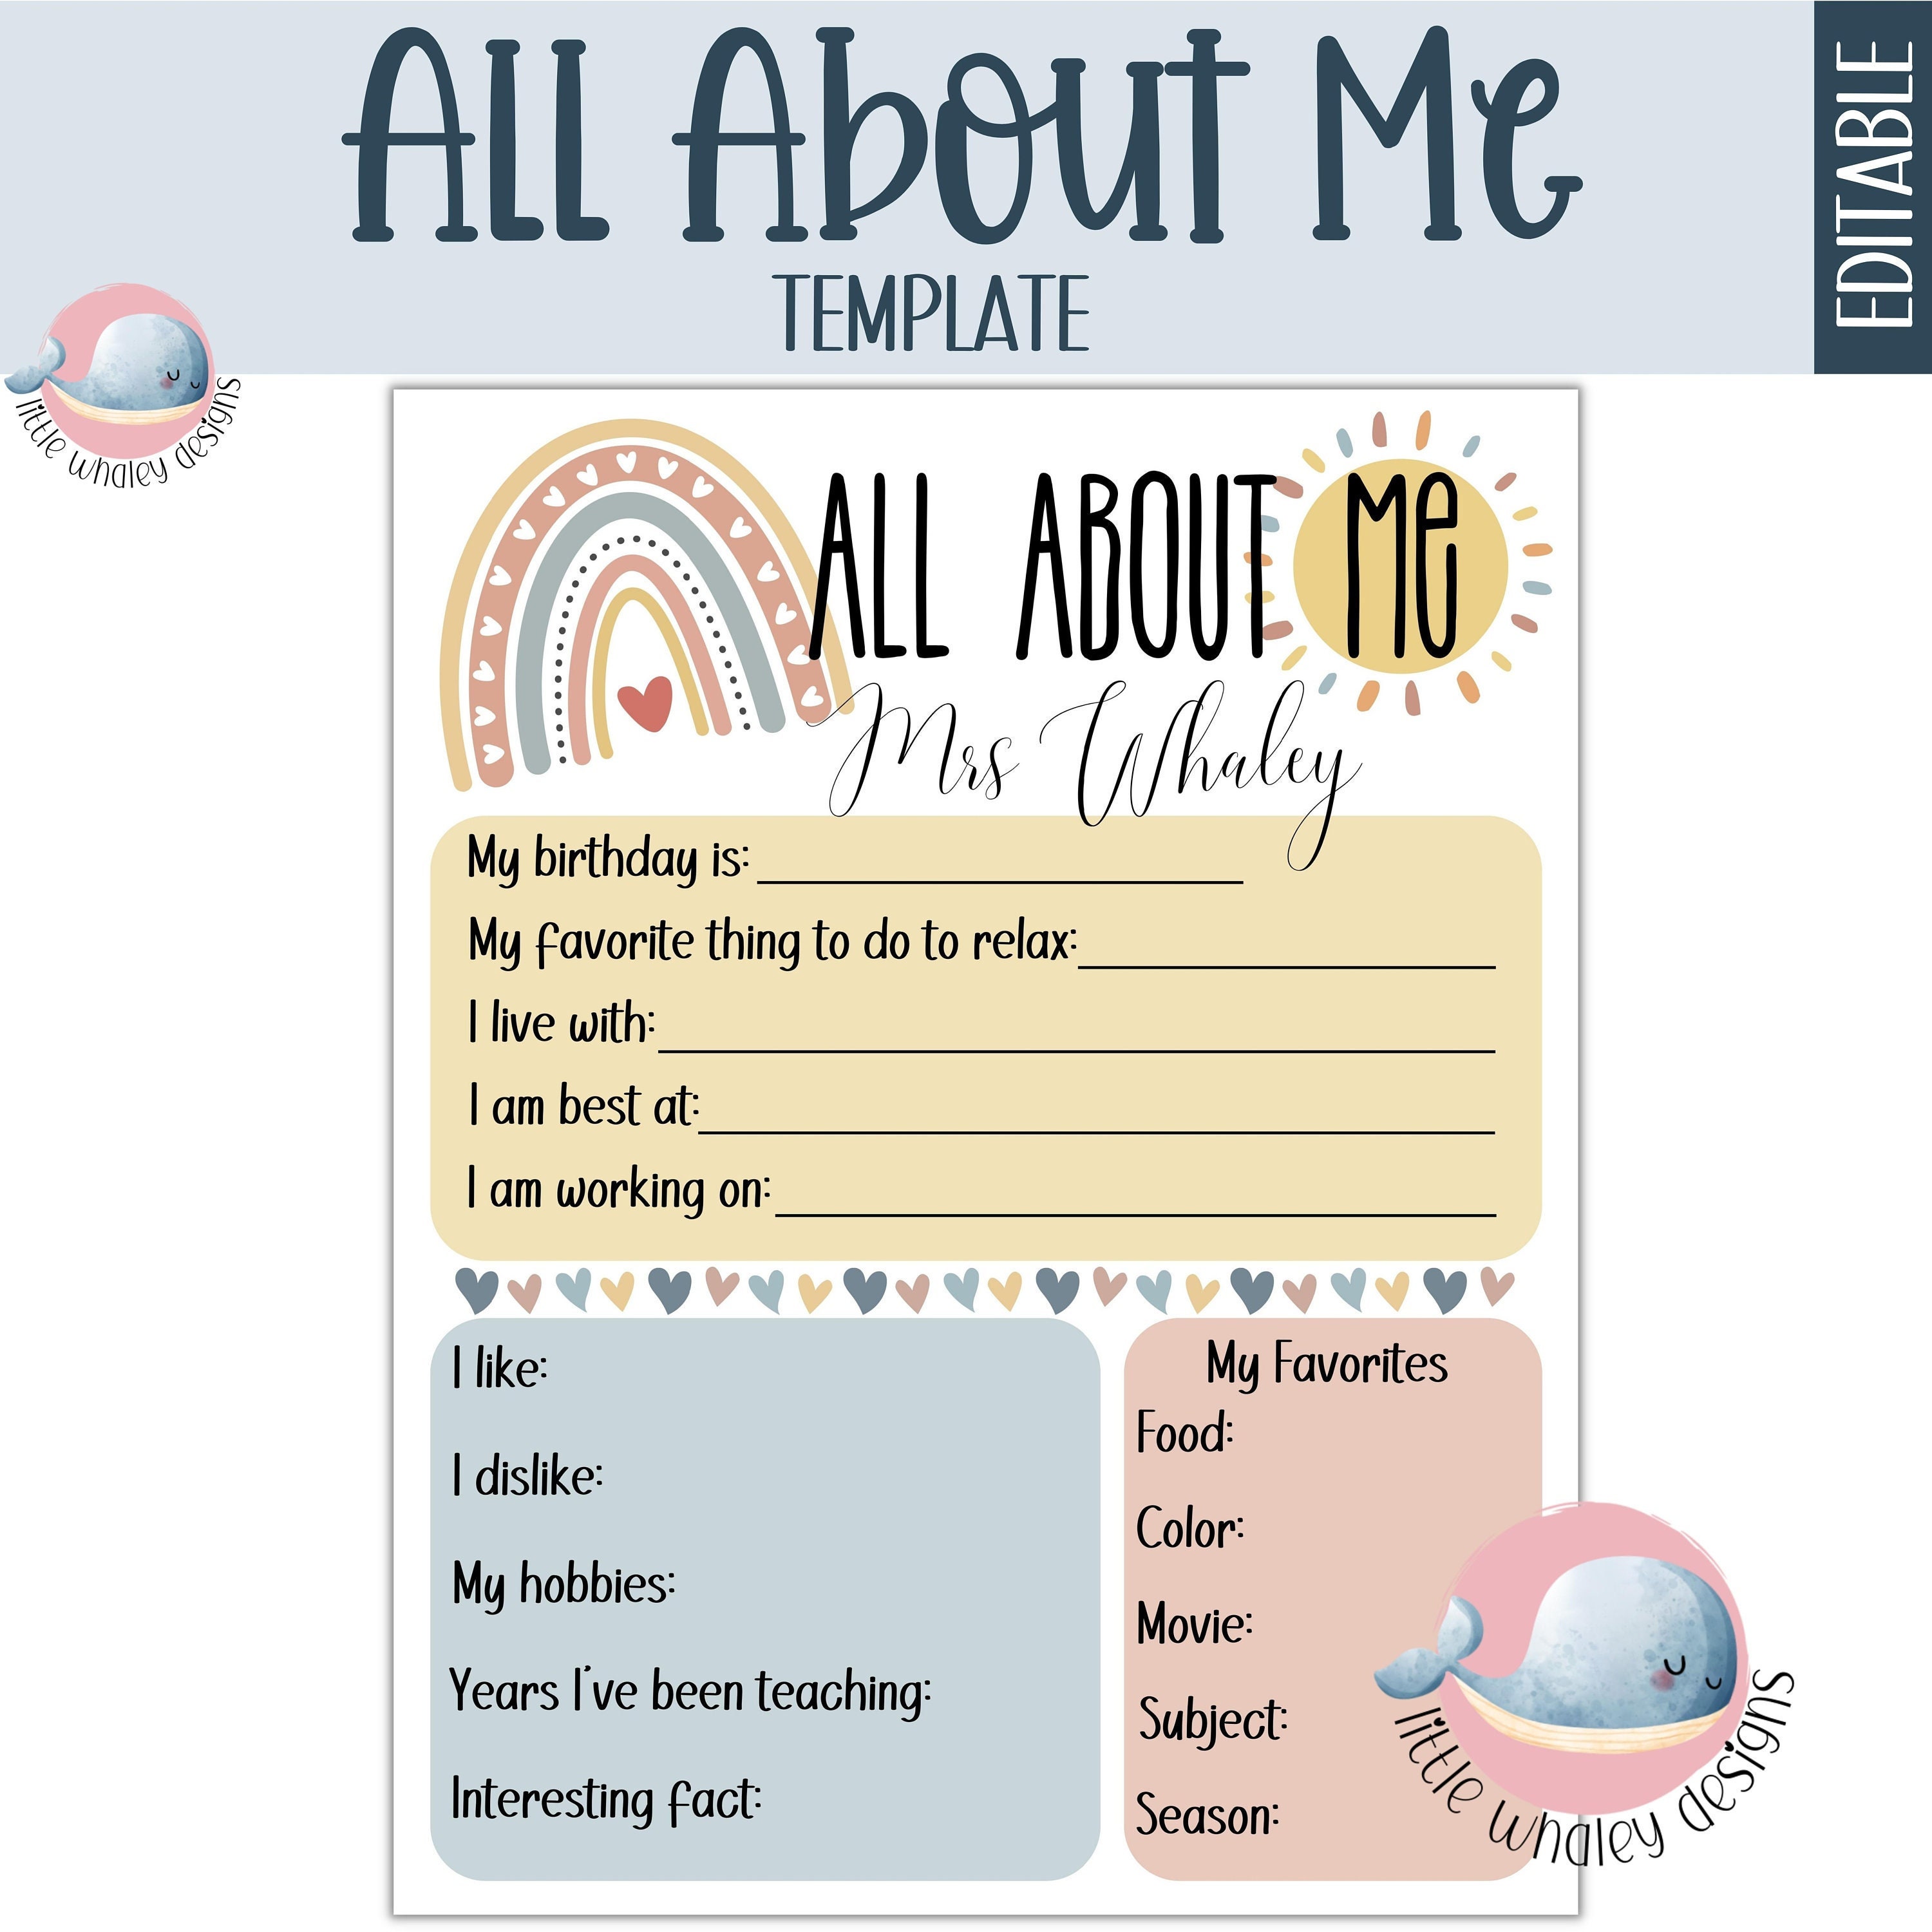 teacher-all-about-me-template-free